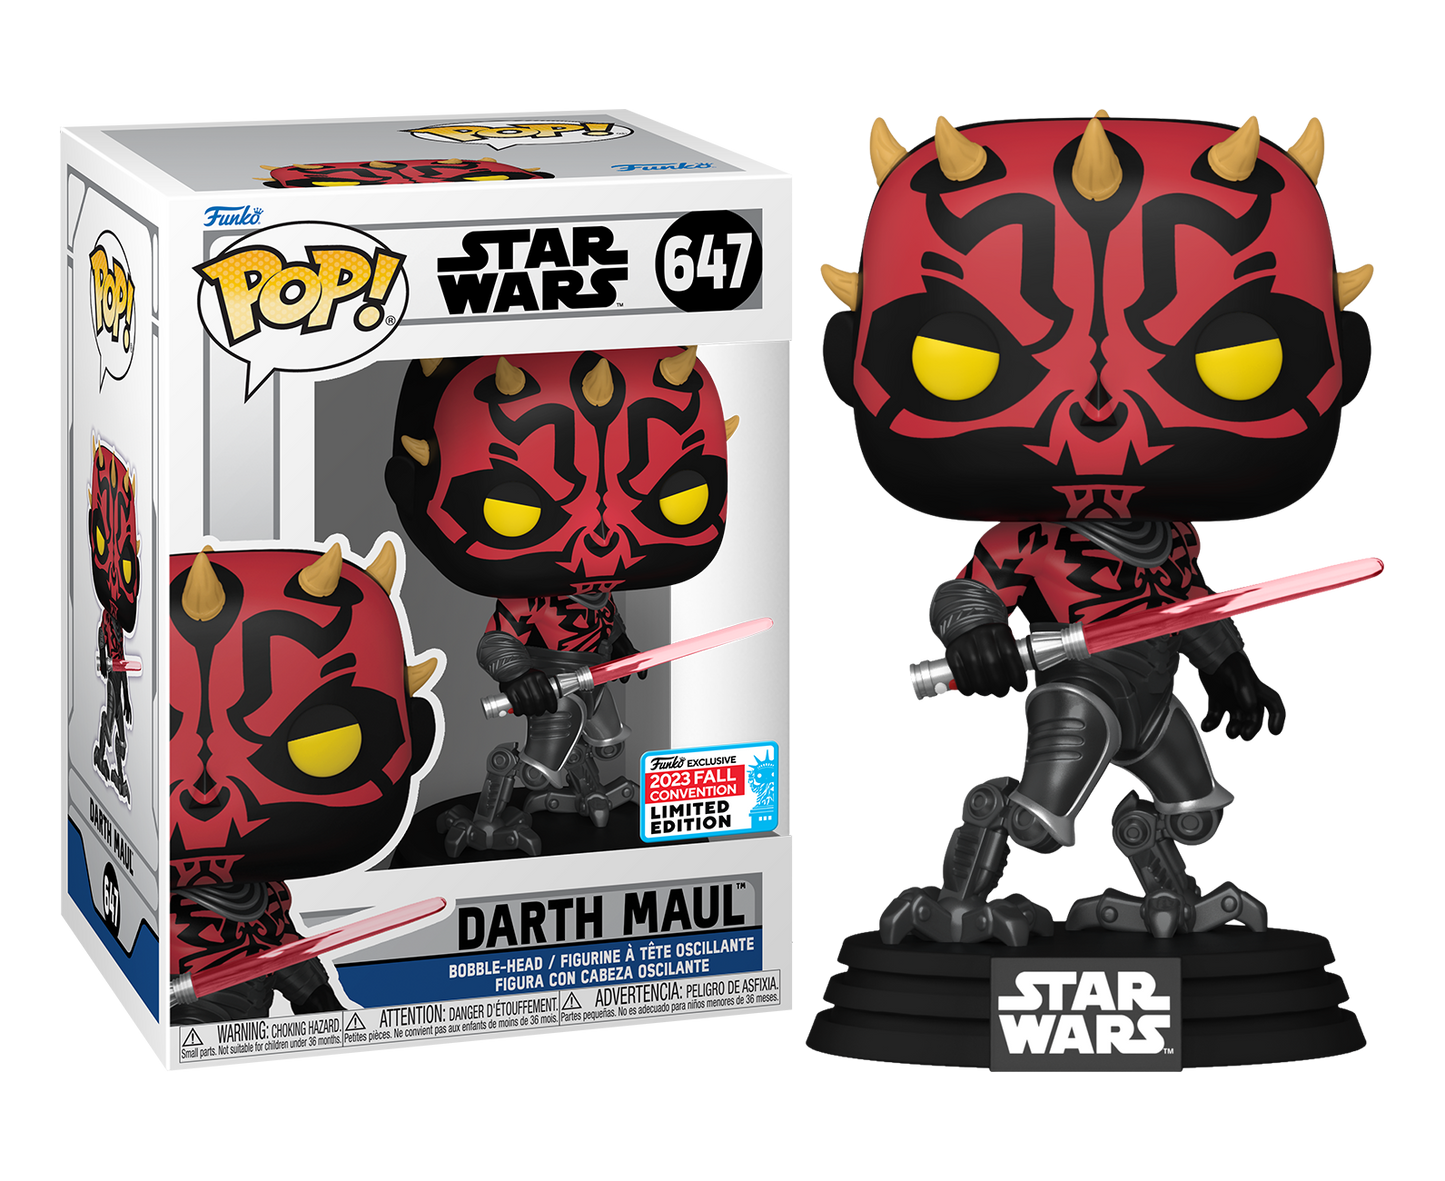 Star Wars - Darth Maul NYCC 2023 Fall Convention Exclusive Pop! Vinyl